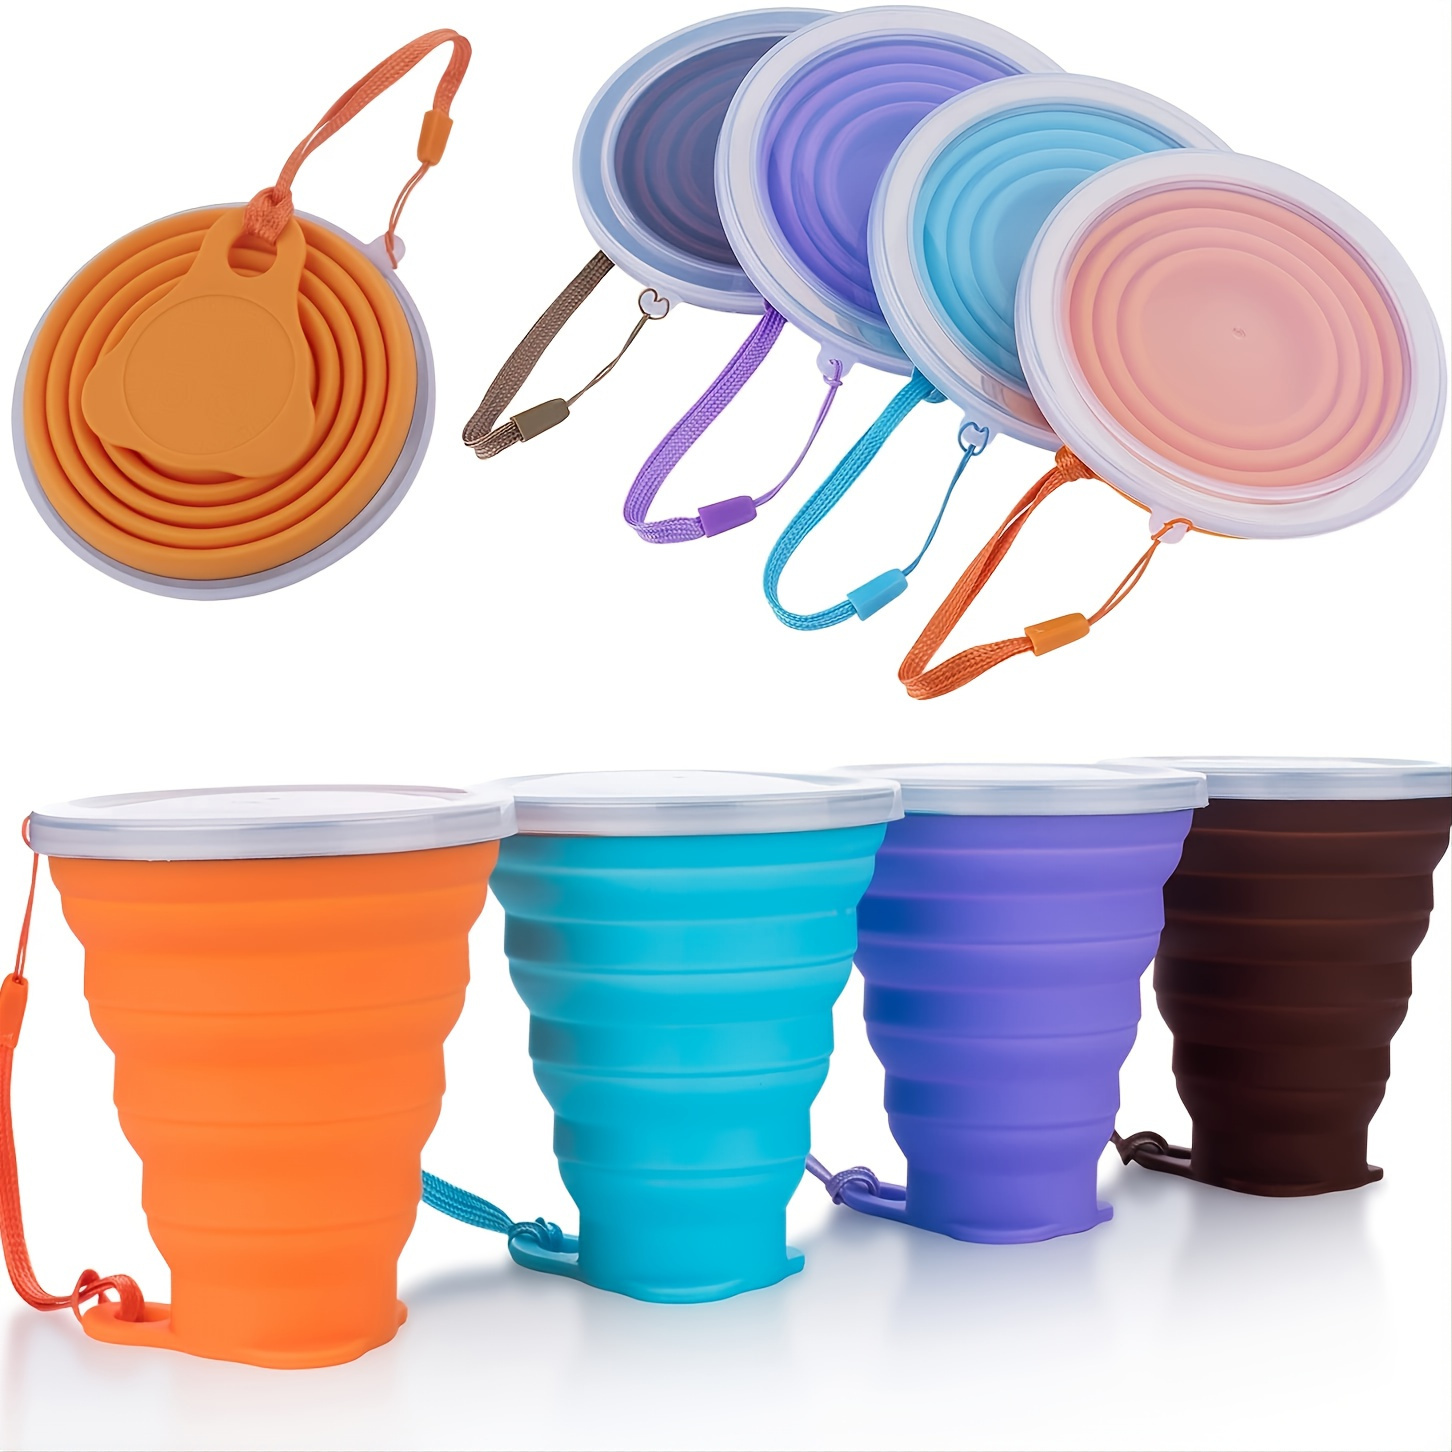 

Collapsible Silicone Travel Cup With Lid - Portable And Reusable Drinking Cup For Camping, Hiking, And Outdoor Activities